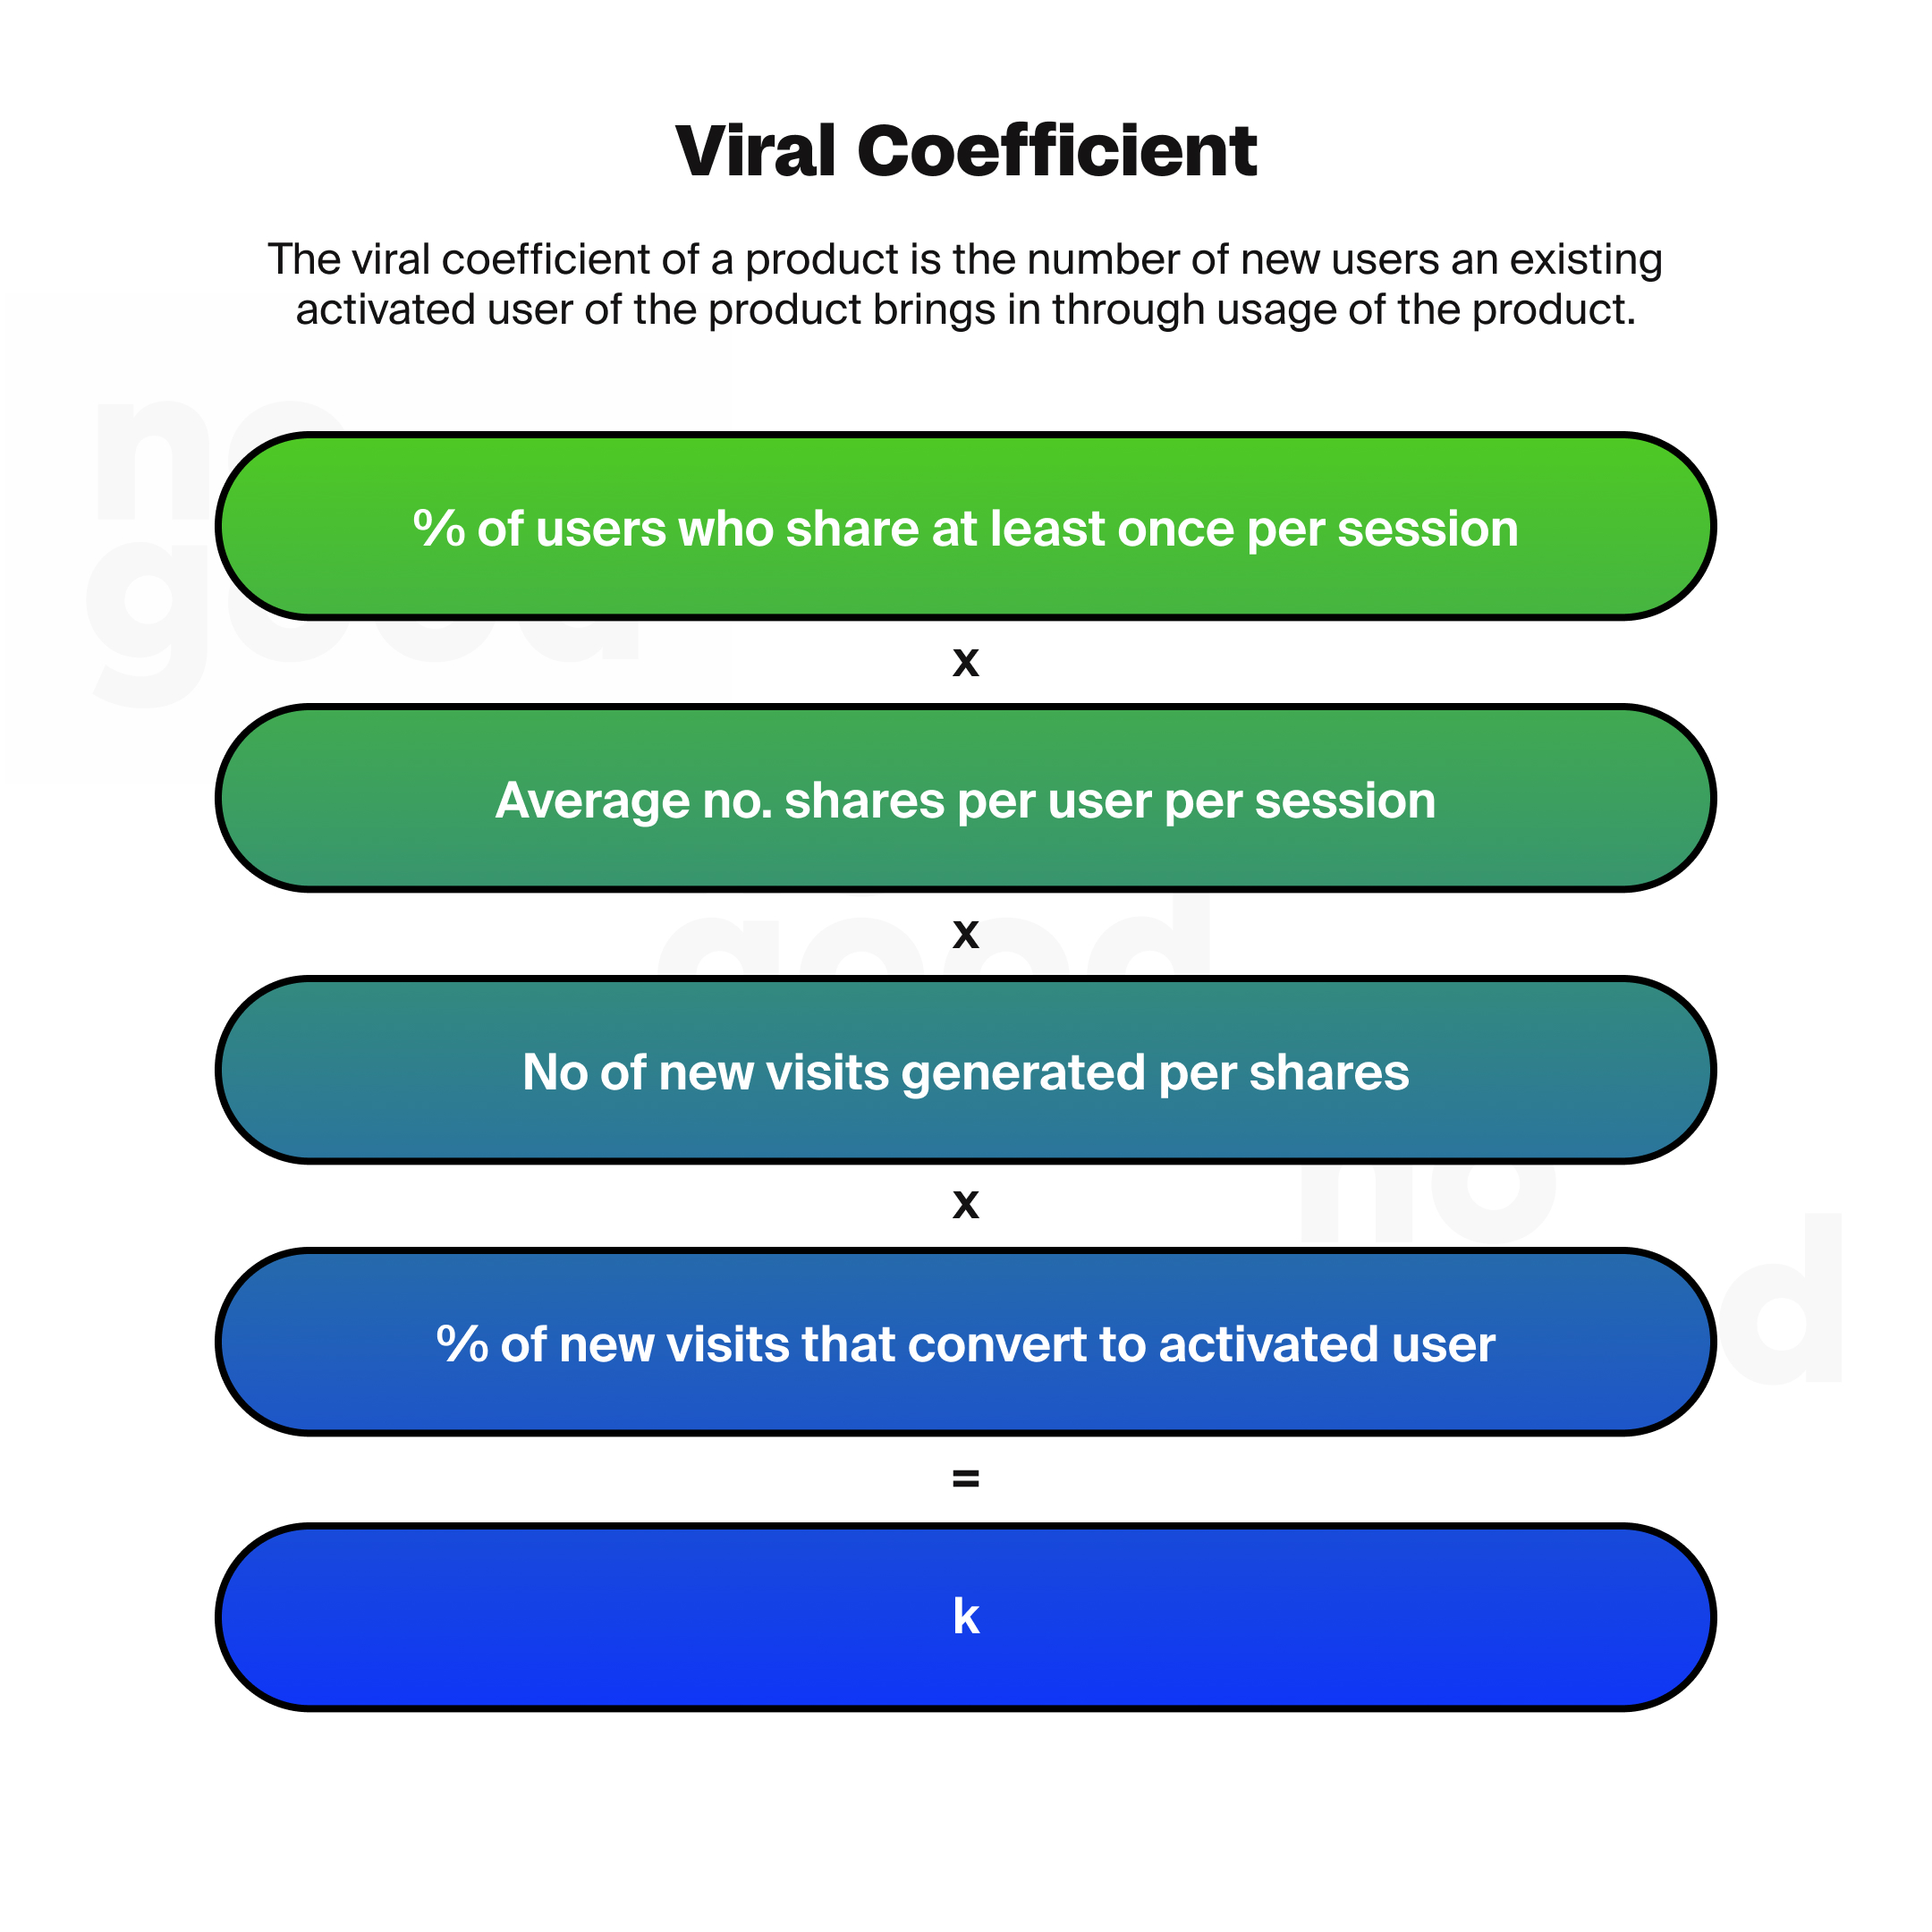 The viral coefficient of a product is the number of new users an existing activated user of the product brings in through usage of the product. 